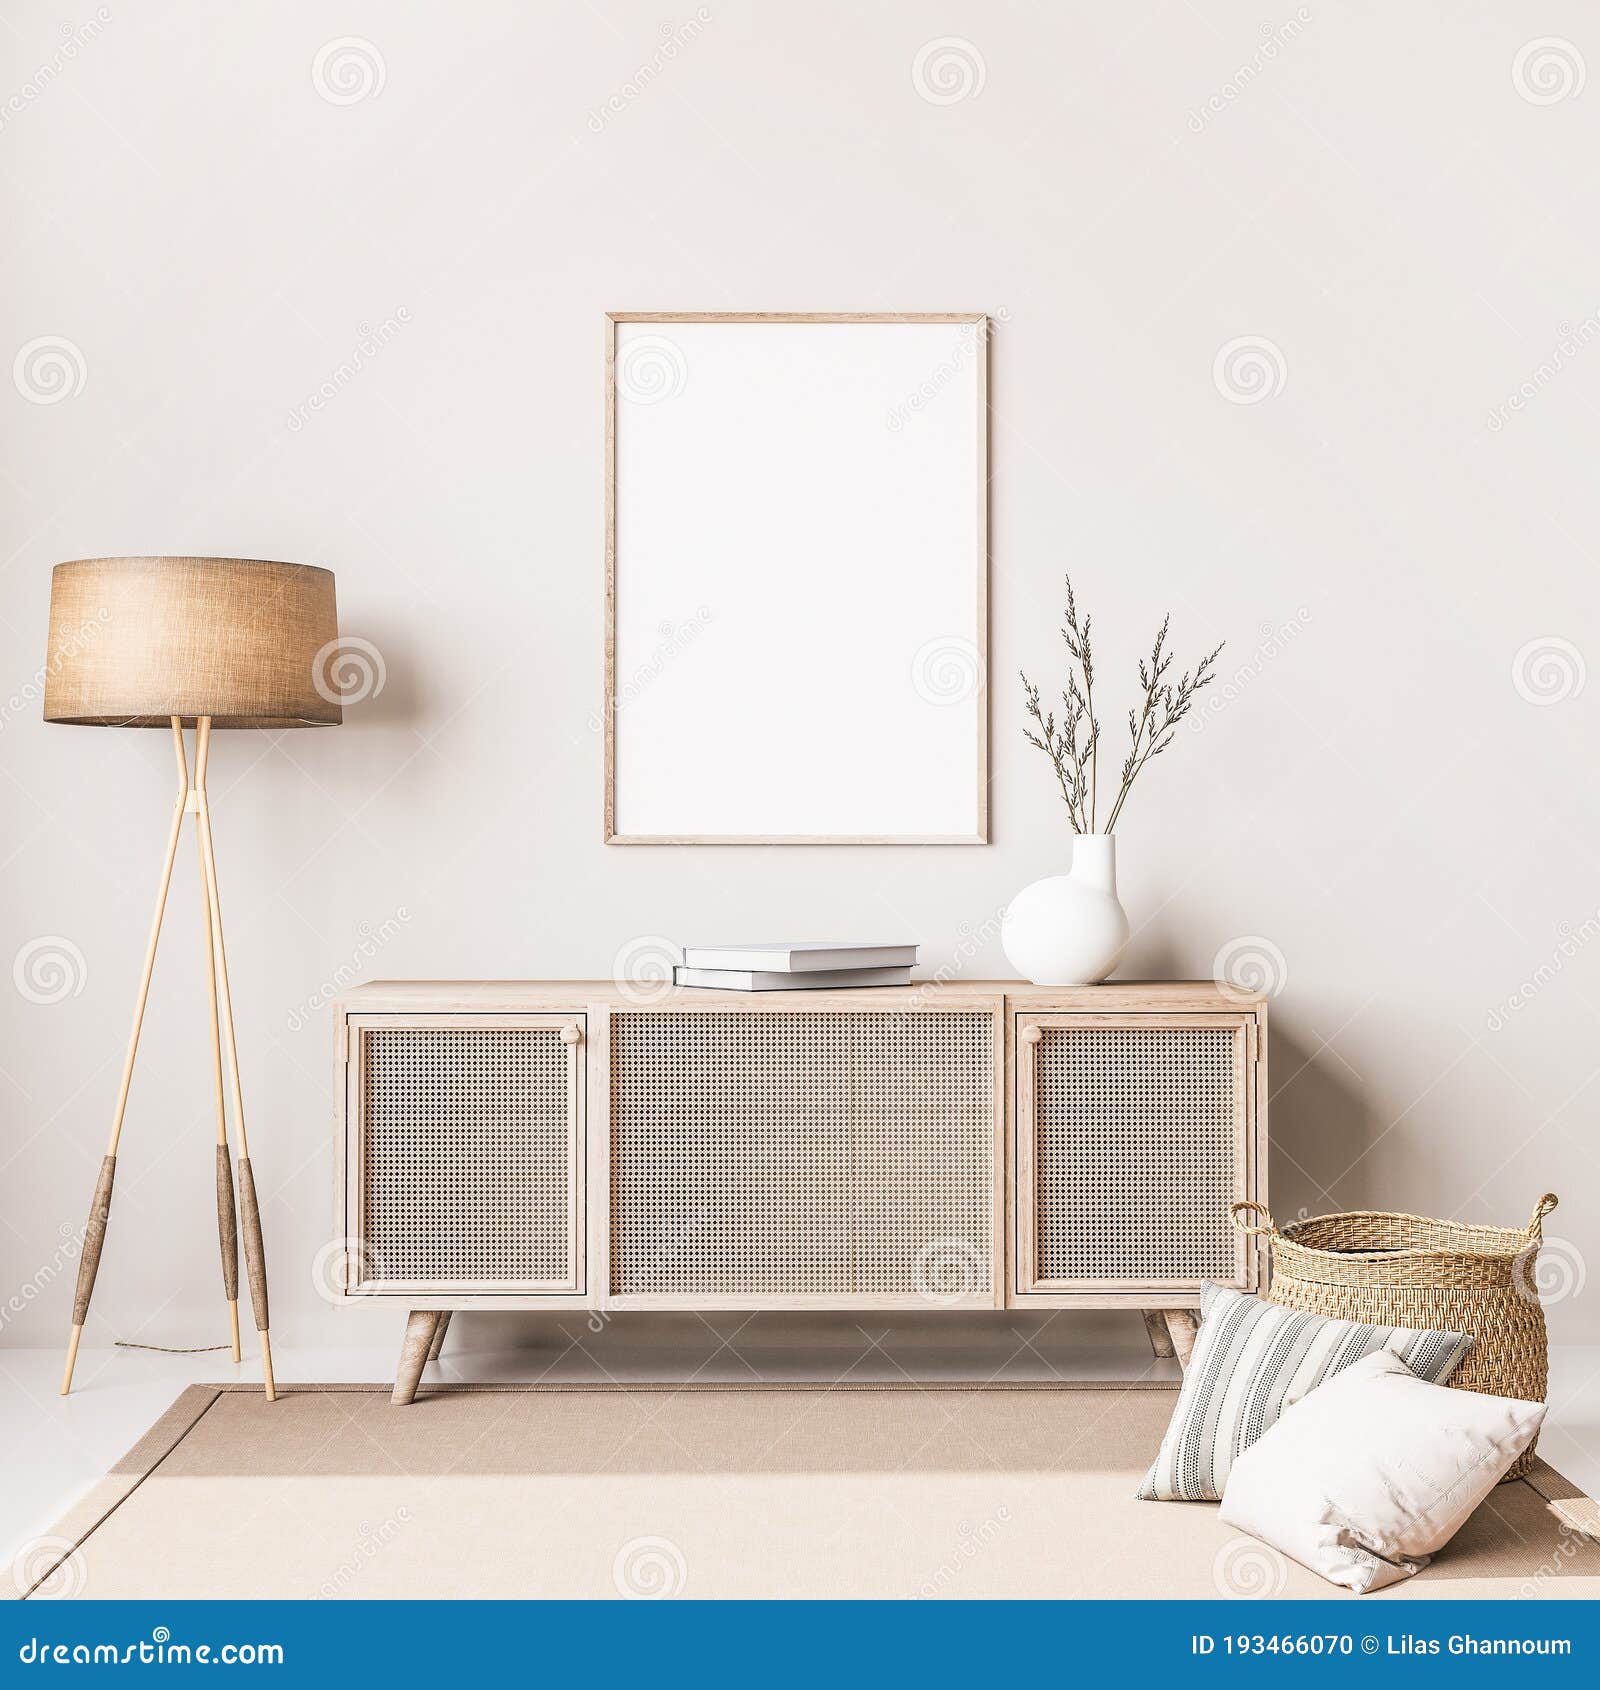 scandinavian interior  of living room with rattan console, wooden chair, mock up poster frame